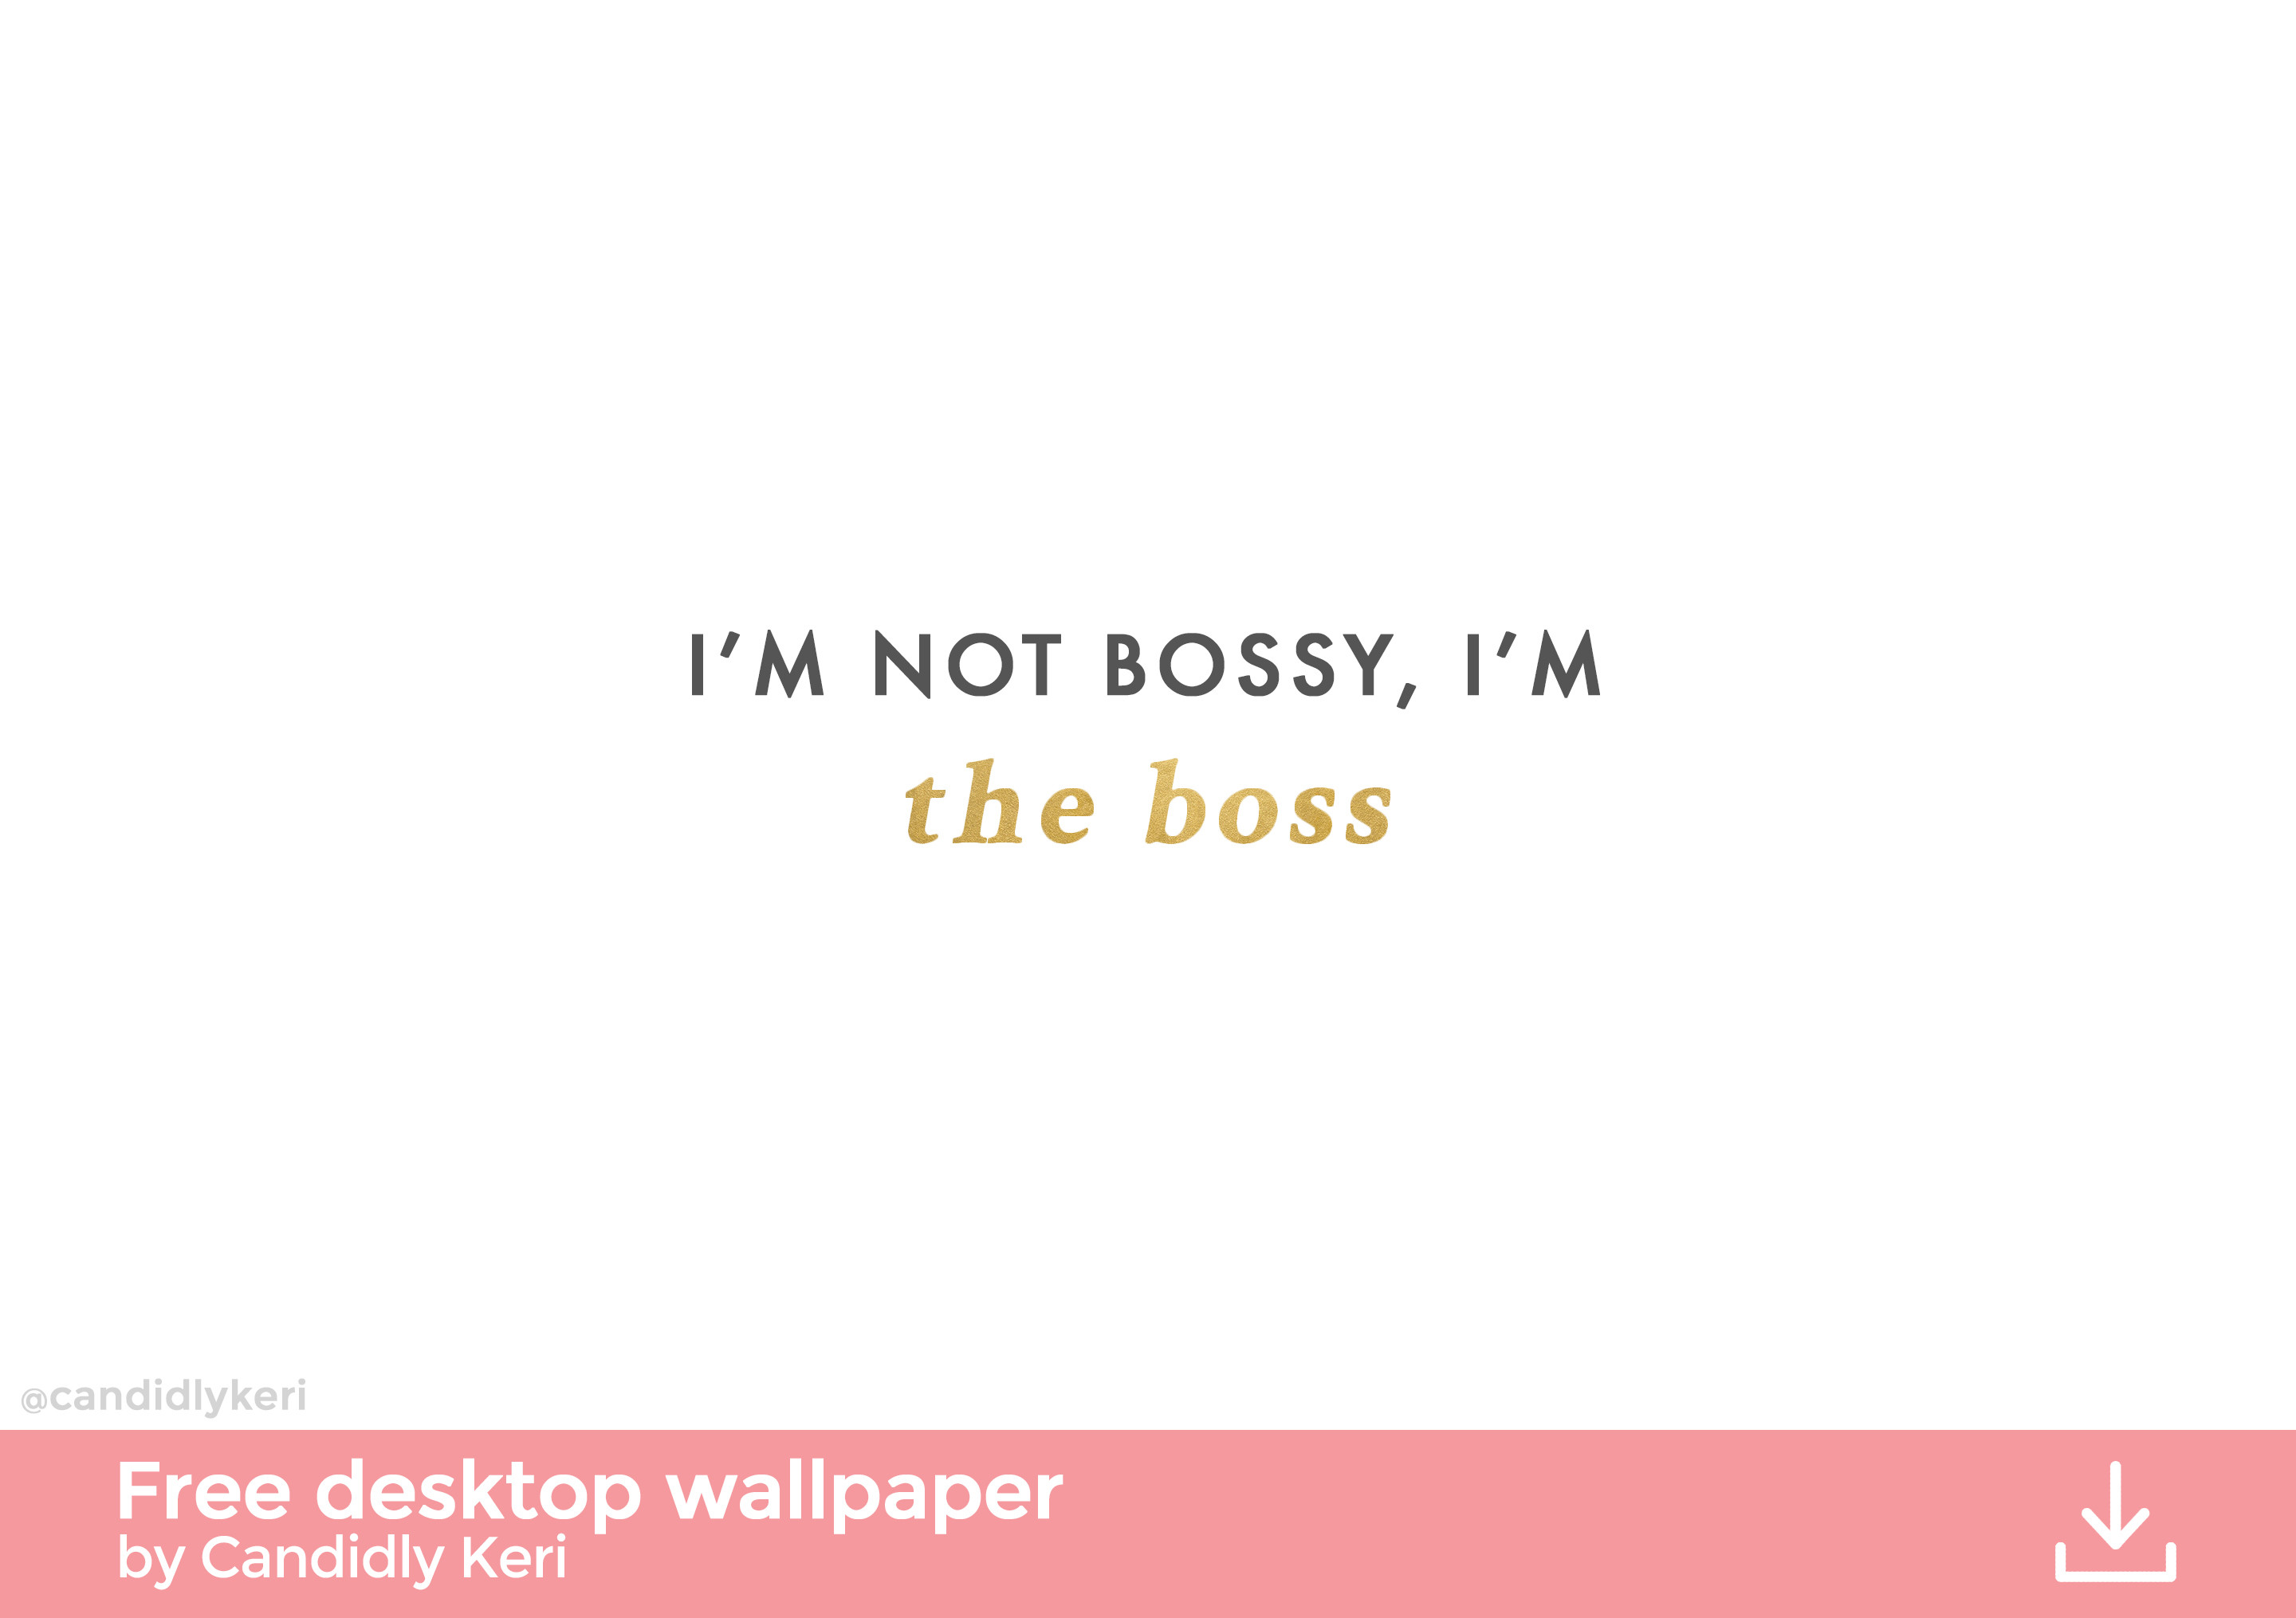 2880x2030 Im not bossy Im the boss gold foil wallpaper you can download for free on  the